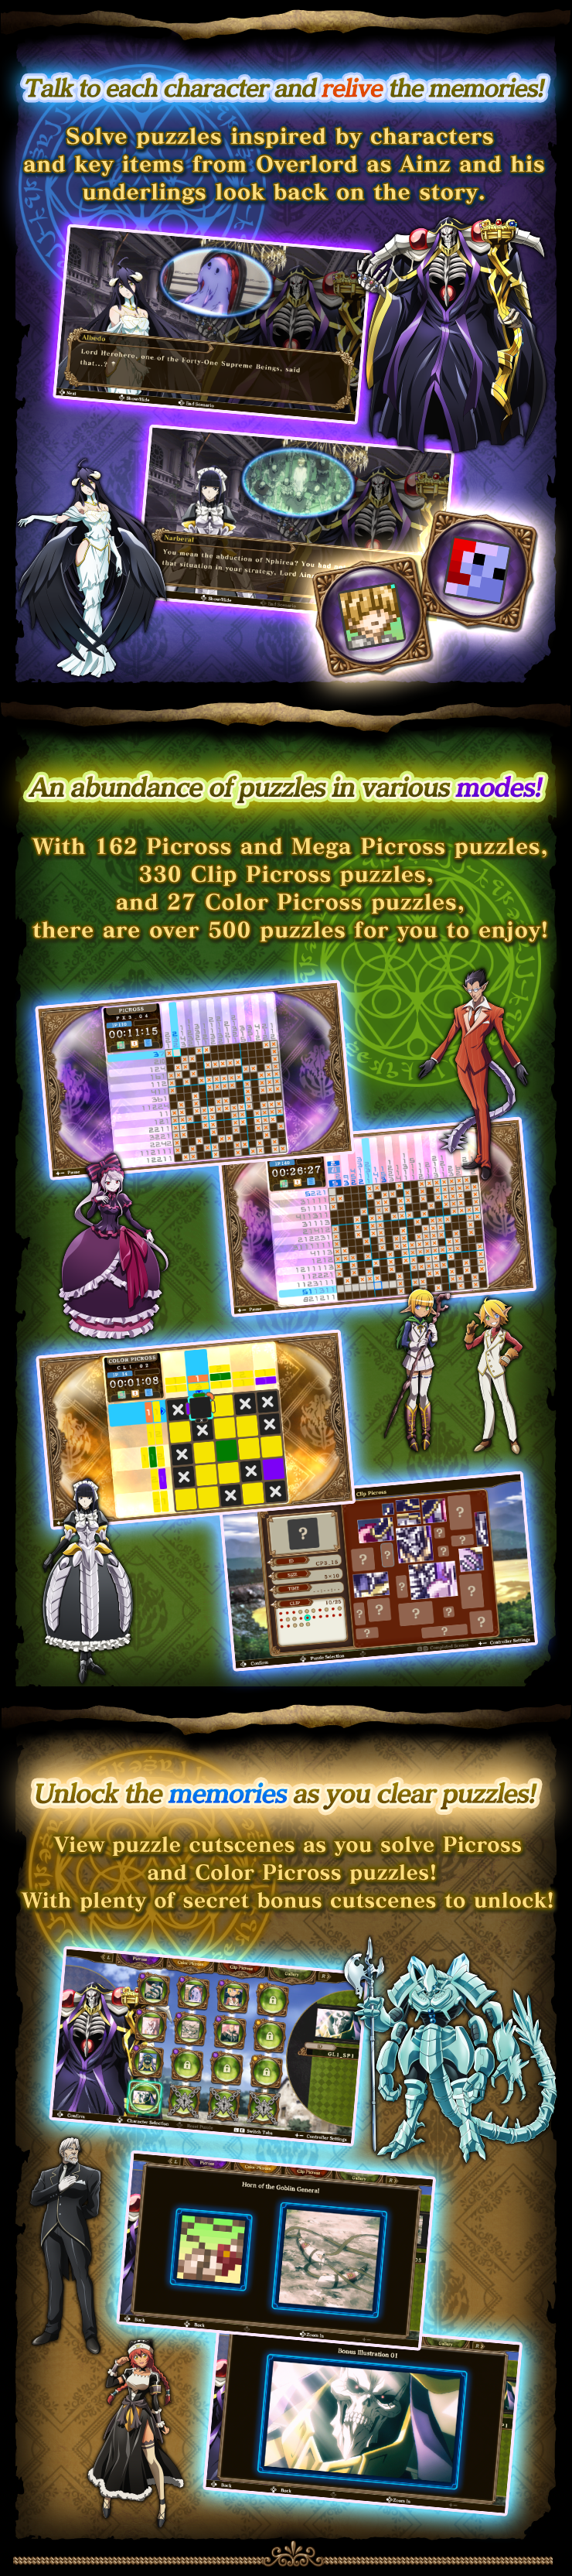 Experience the story of Overlord through Picross!